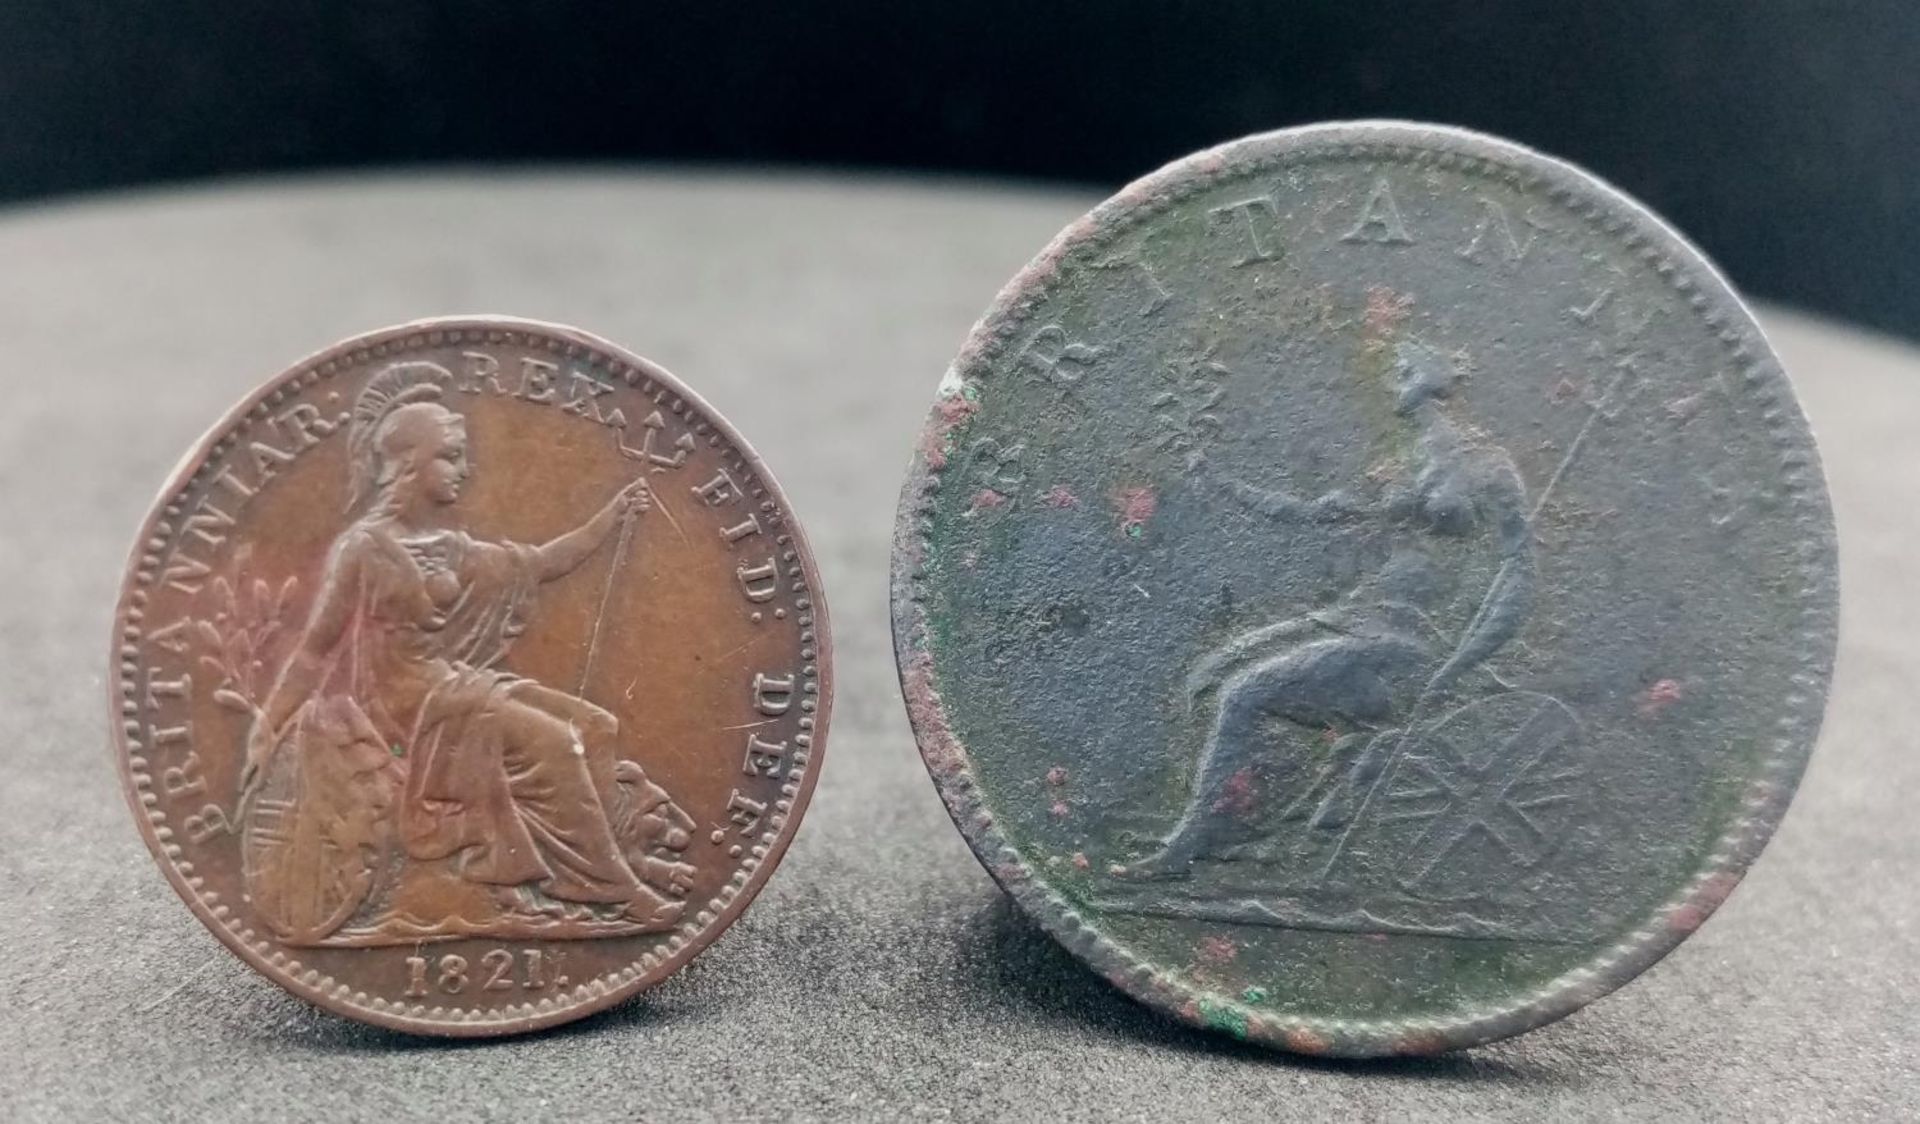 An 1821 George III Farthing and an 1806 Half Penny.